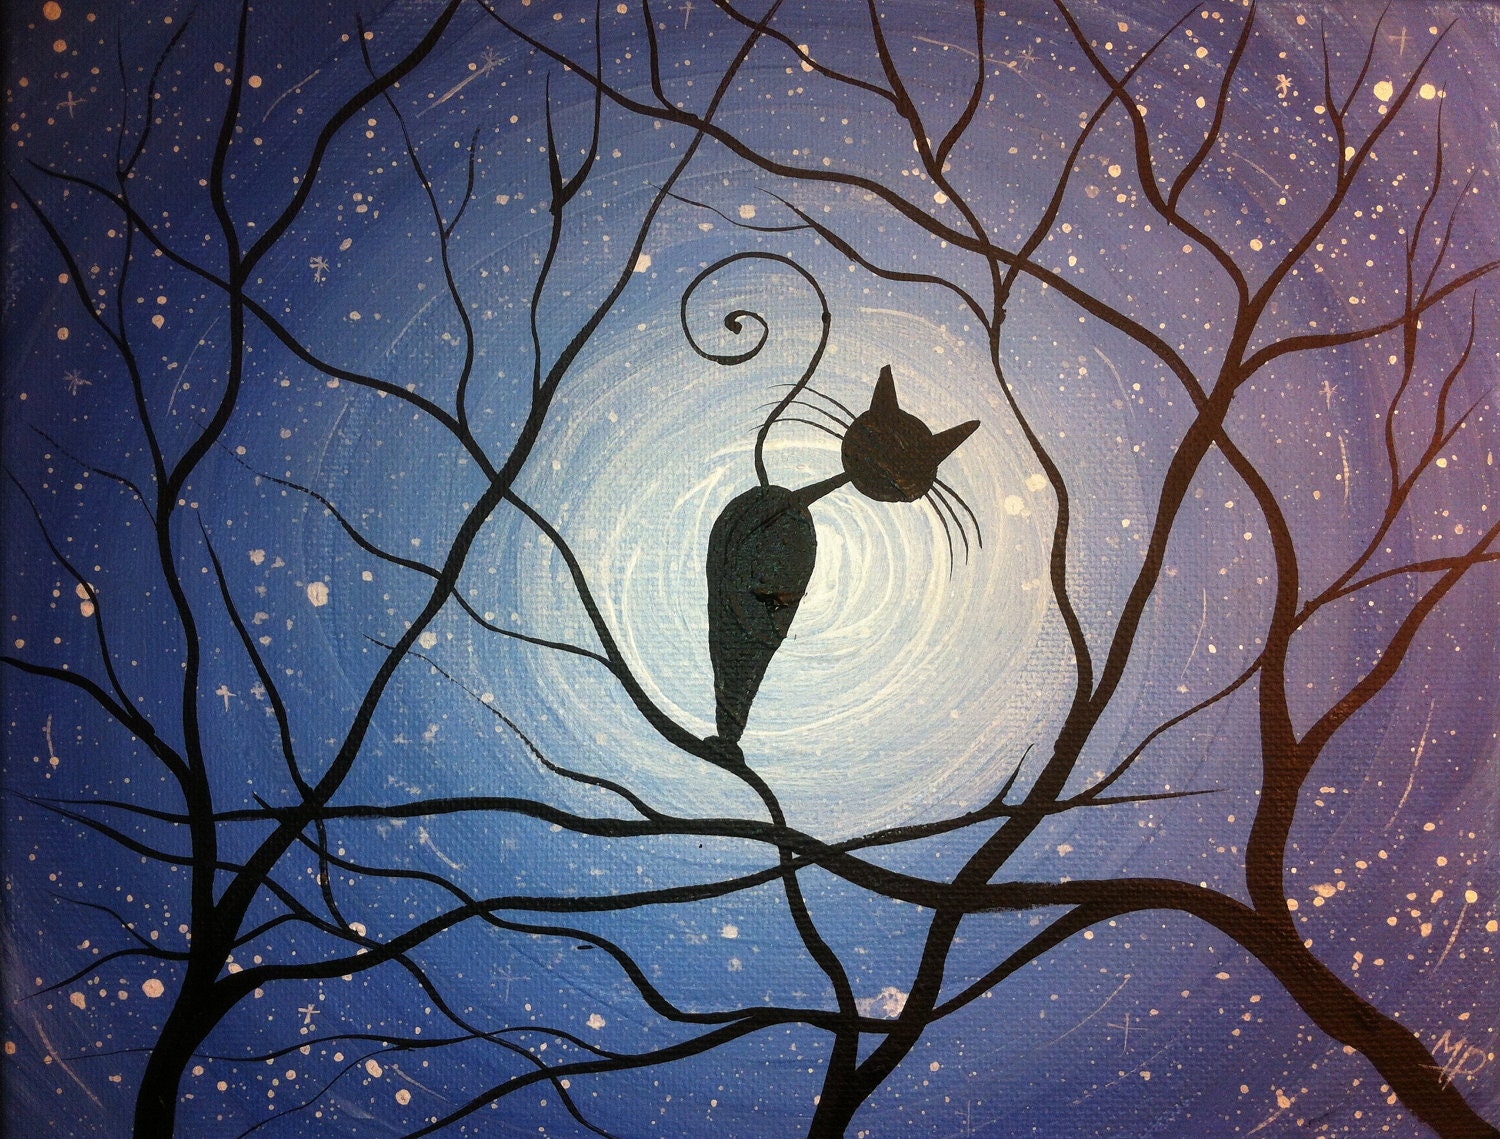 Whimsical Cat Painting-Counting Stars 8 x 10 Acrylic on